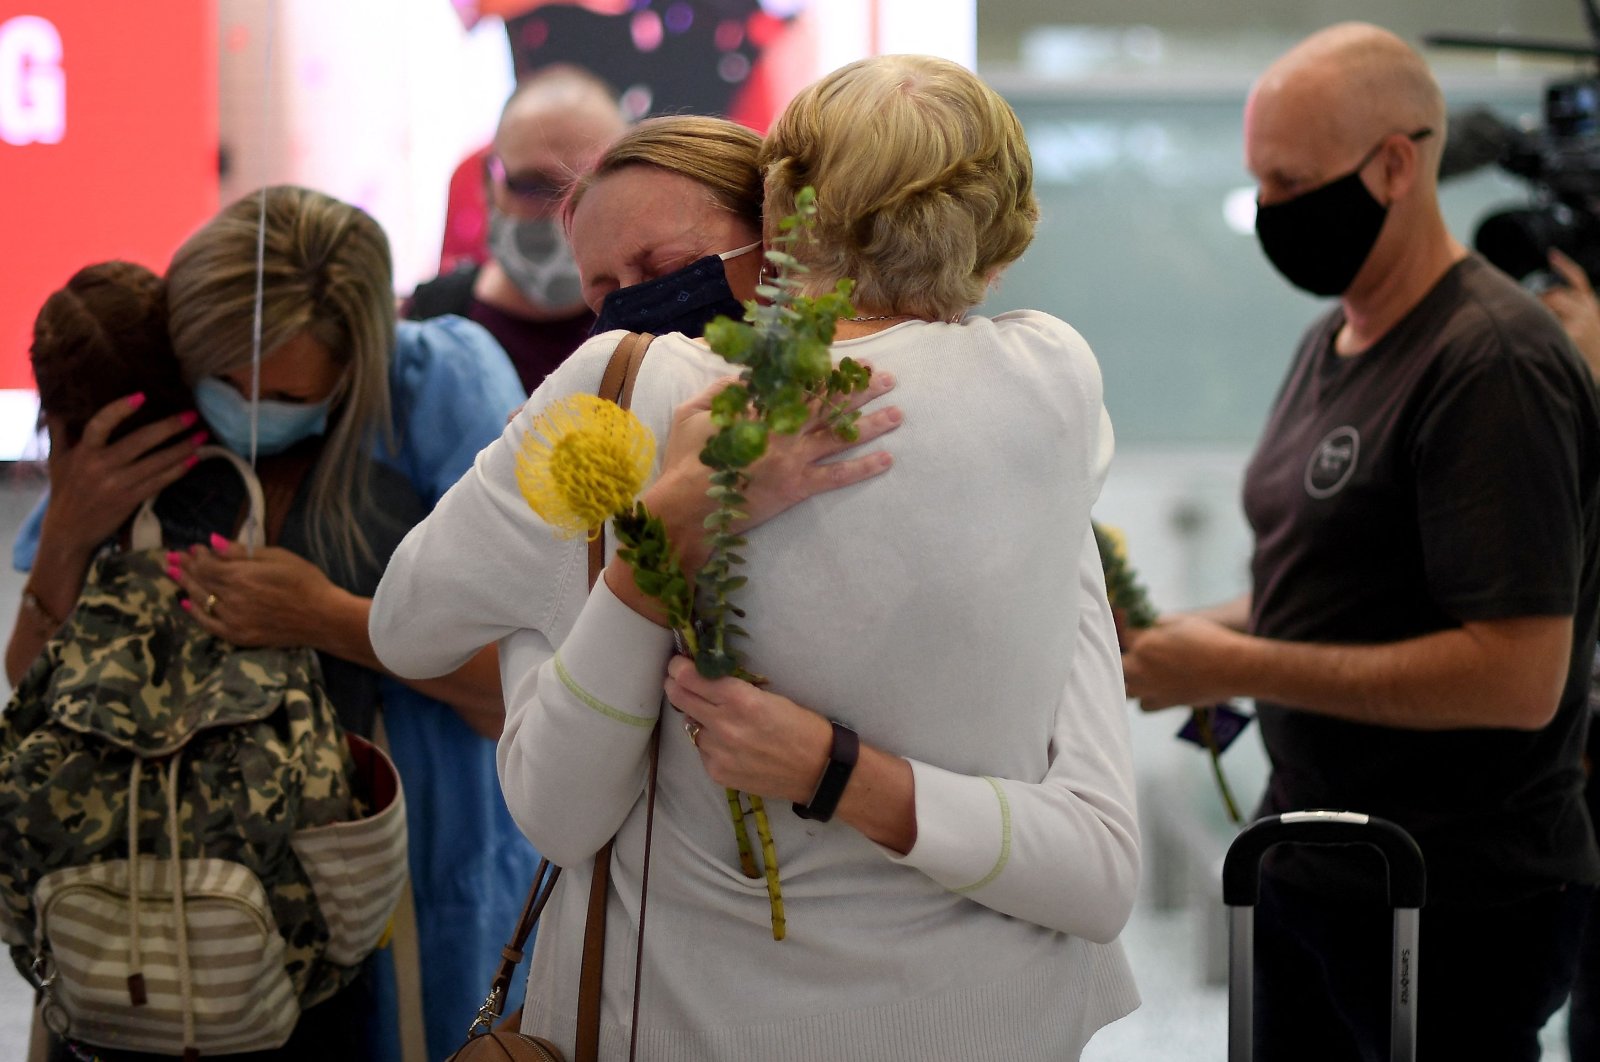 Family members celebrate upon being reunited on arrival at Sydney's International Airport on Nov. 1, 2021, as Australia's international border reopened almost 600 days after a pandemic closure began. (AFP Photo)